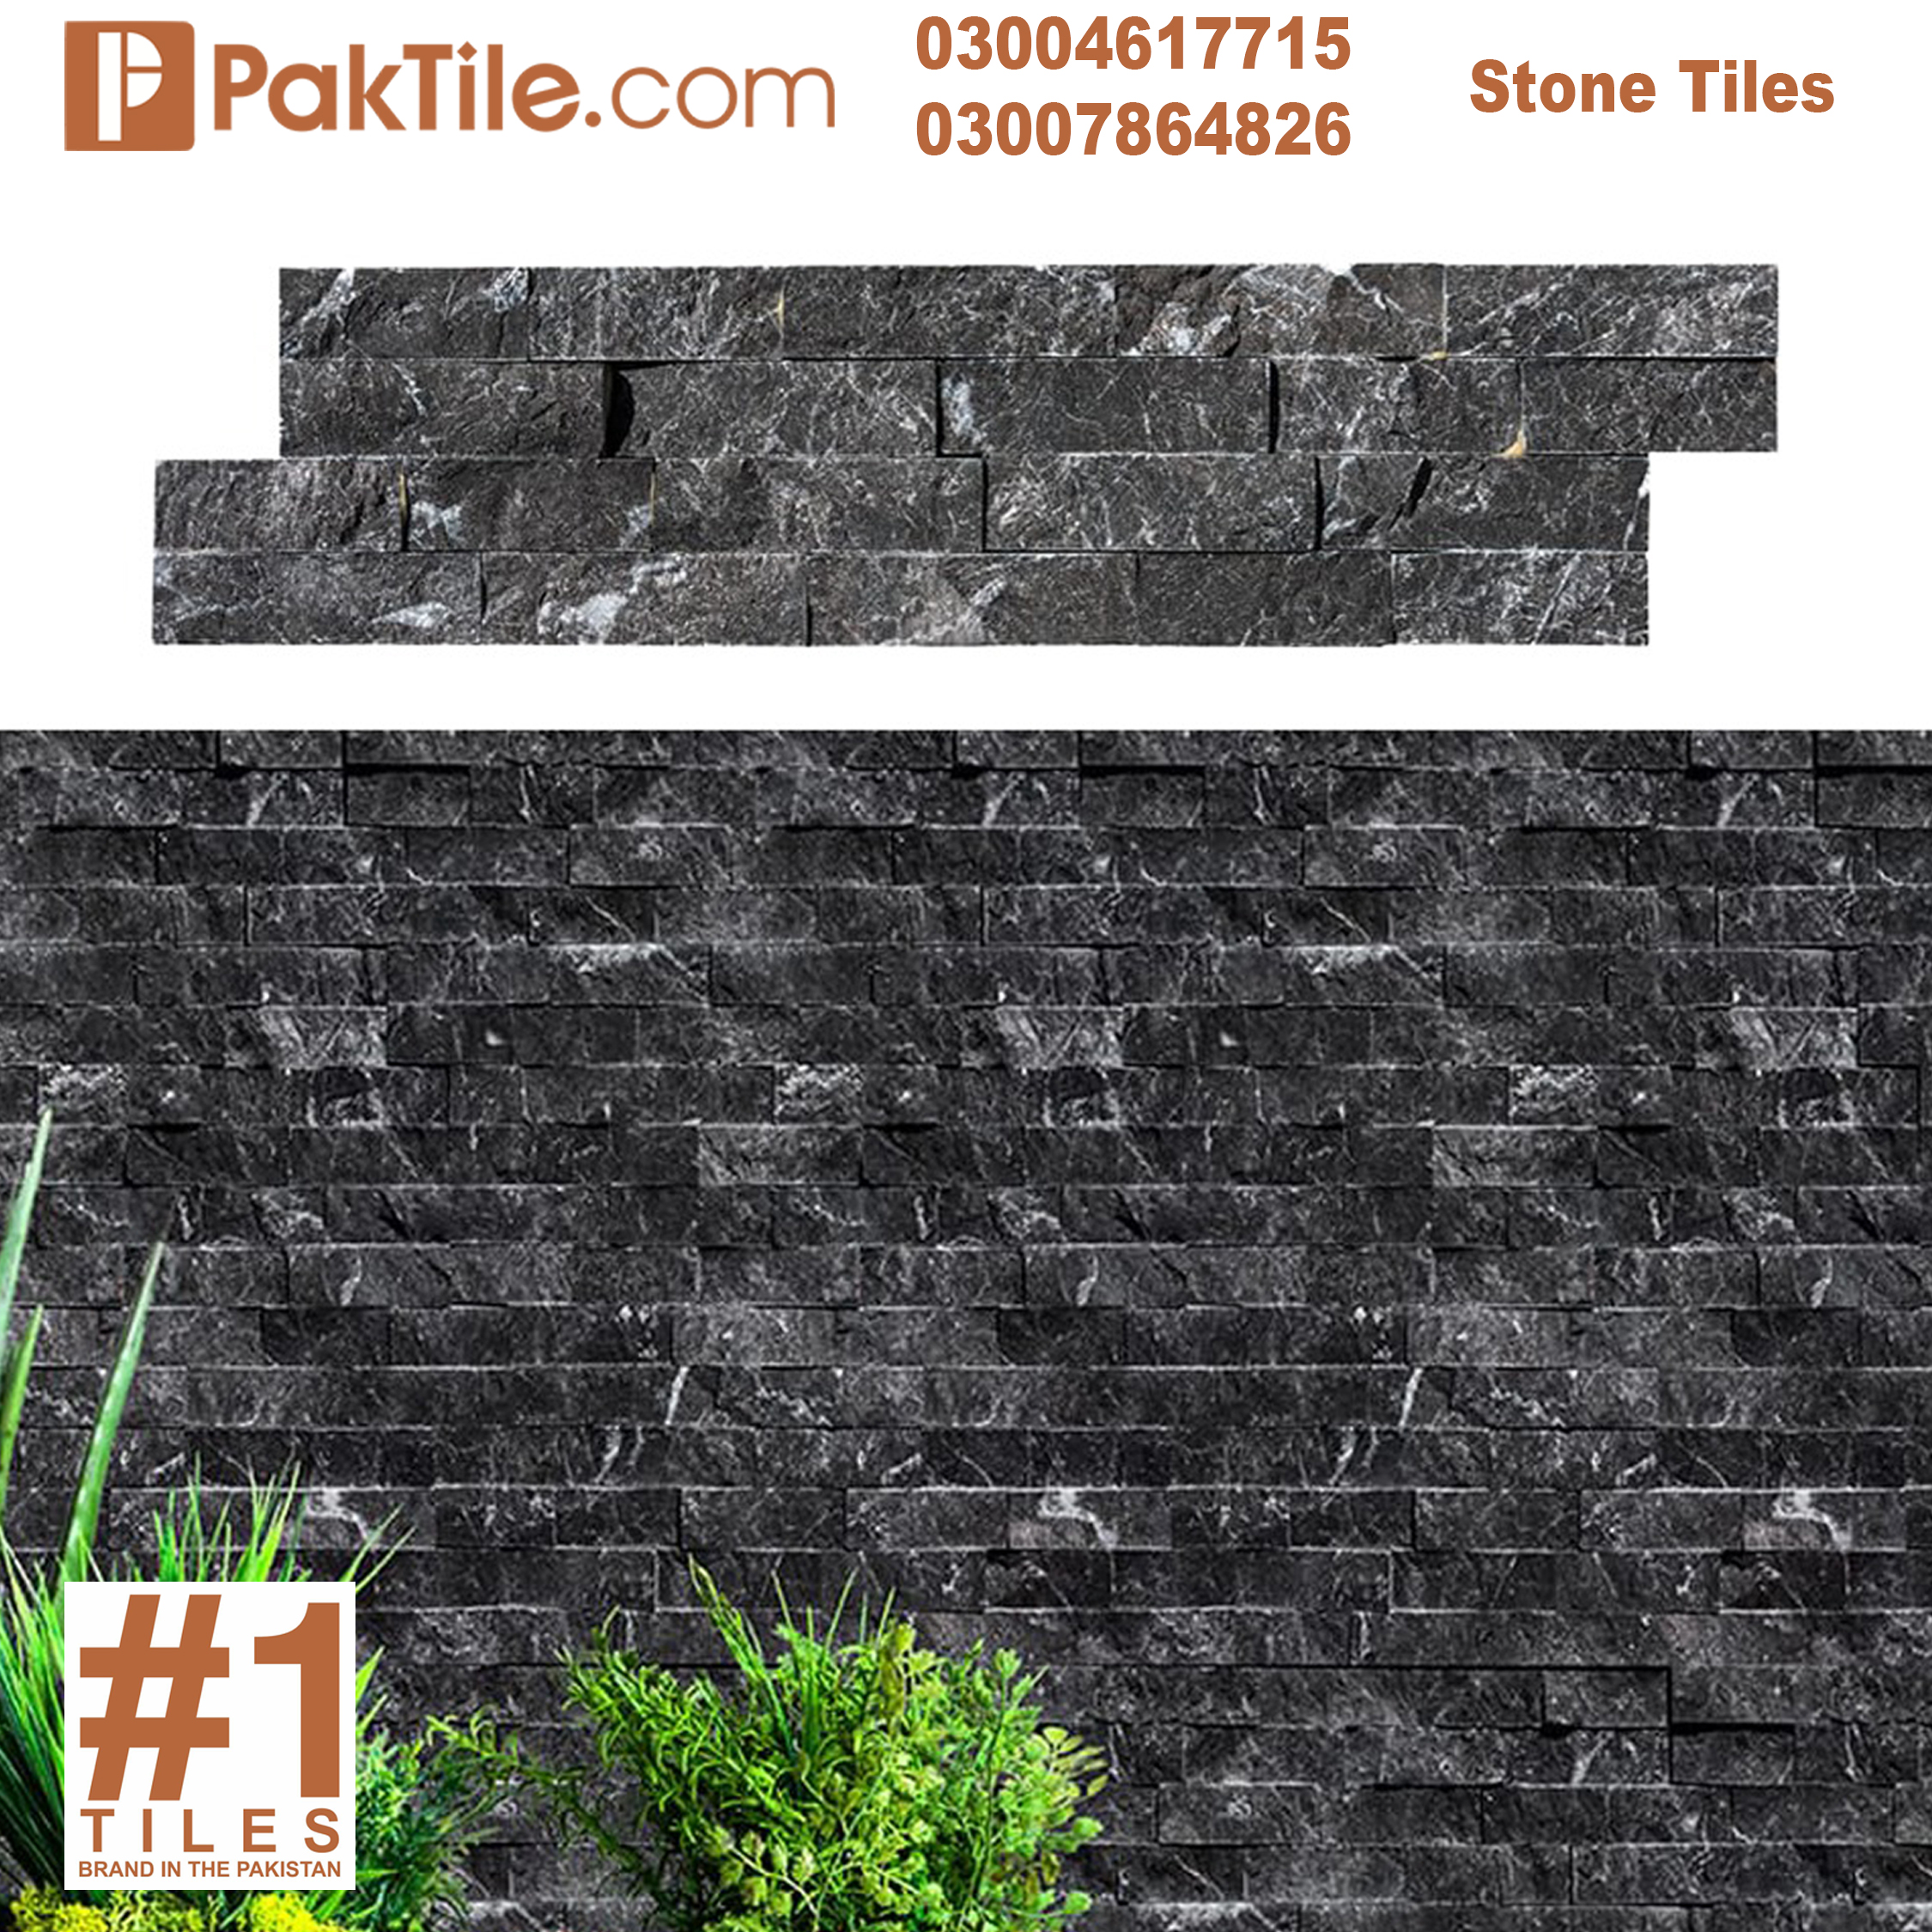 Stone Cladding for Exterior Walls